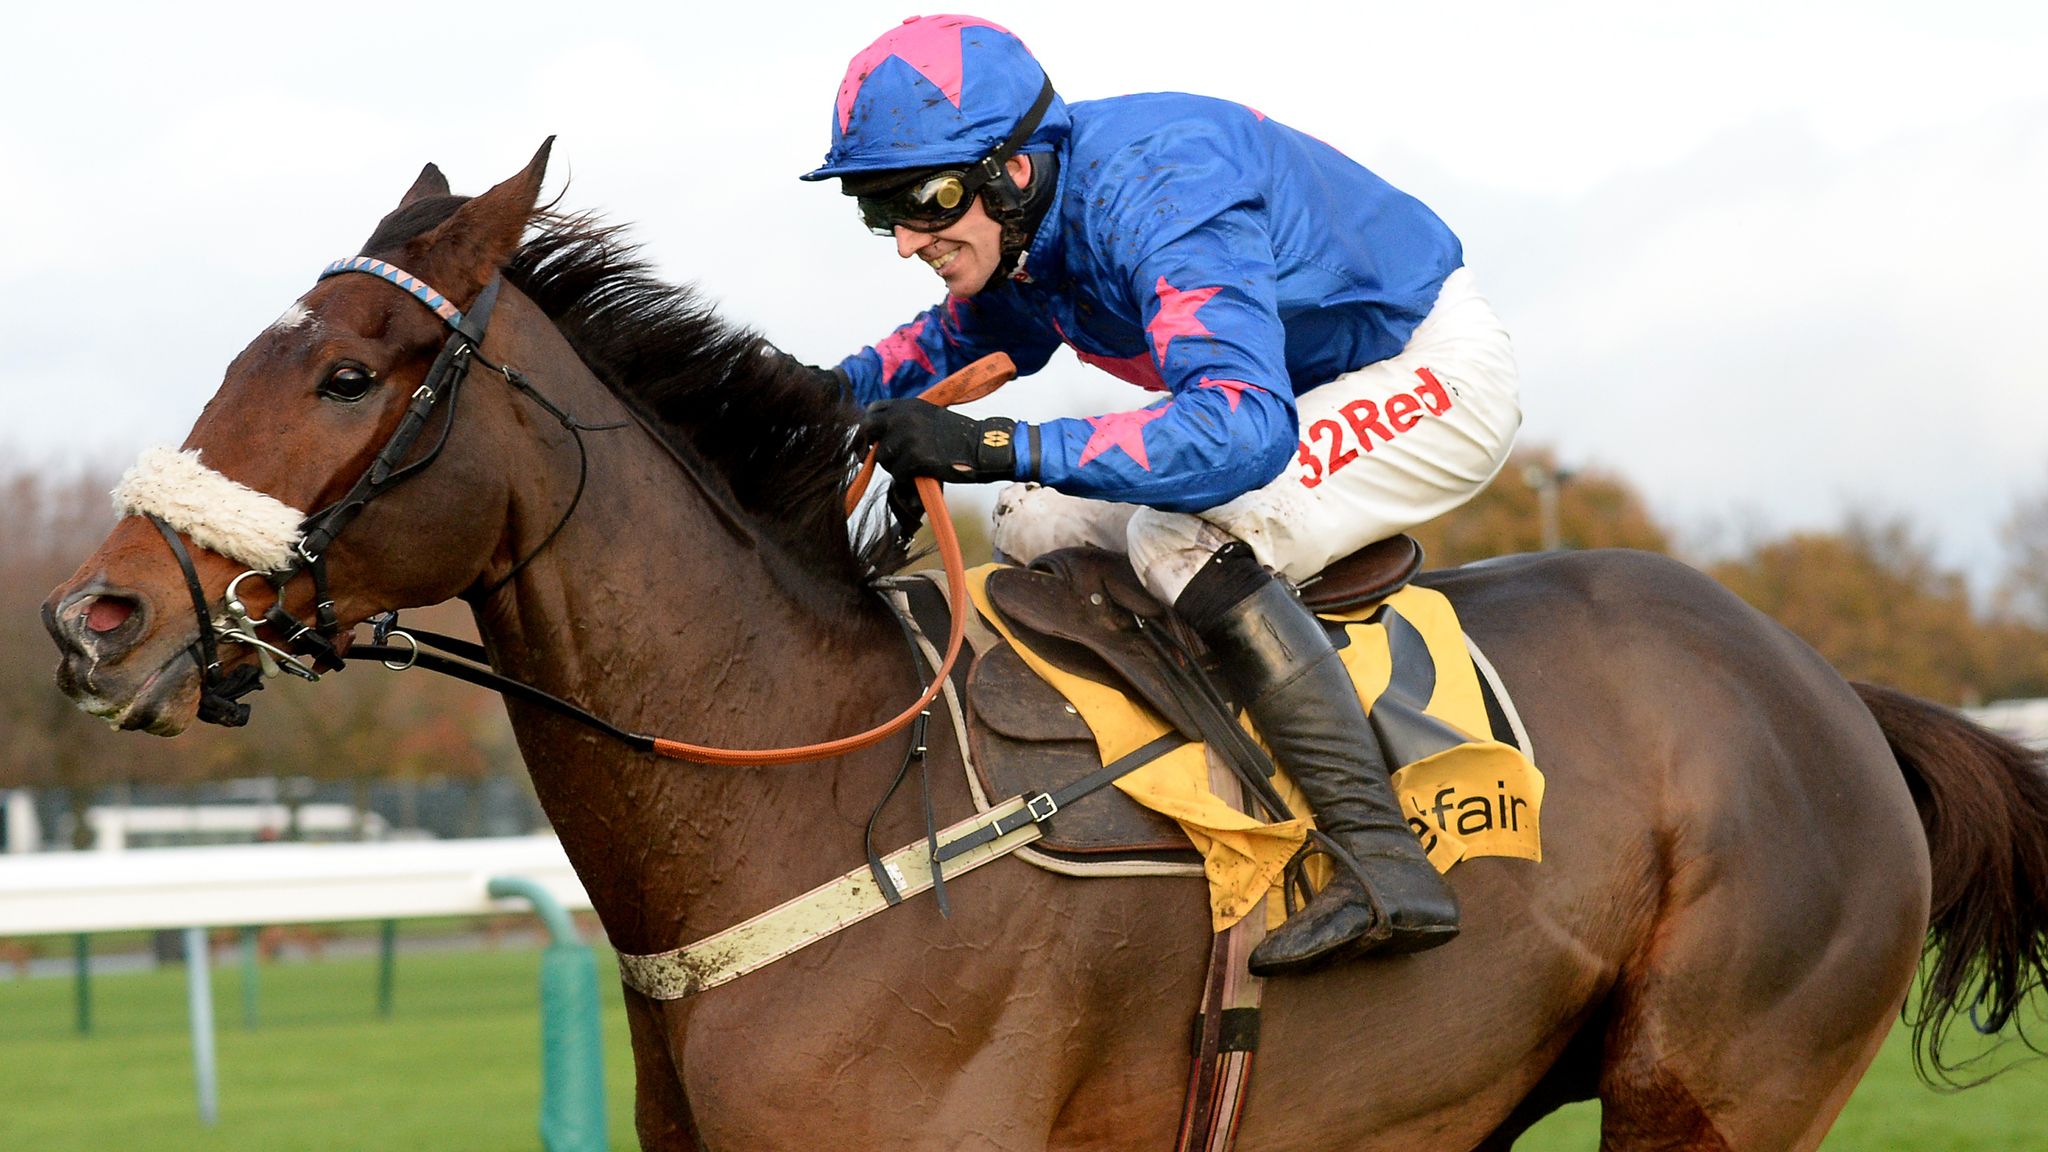 Cue Card ridden by Paddy Brennan after clearing the final fence to win the Betfair Steeple Chase during Betfair Chase day at Haydock Racecourse. 